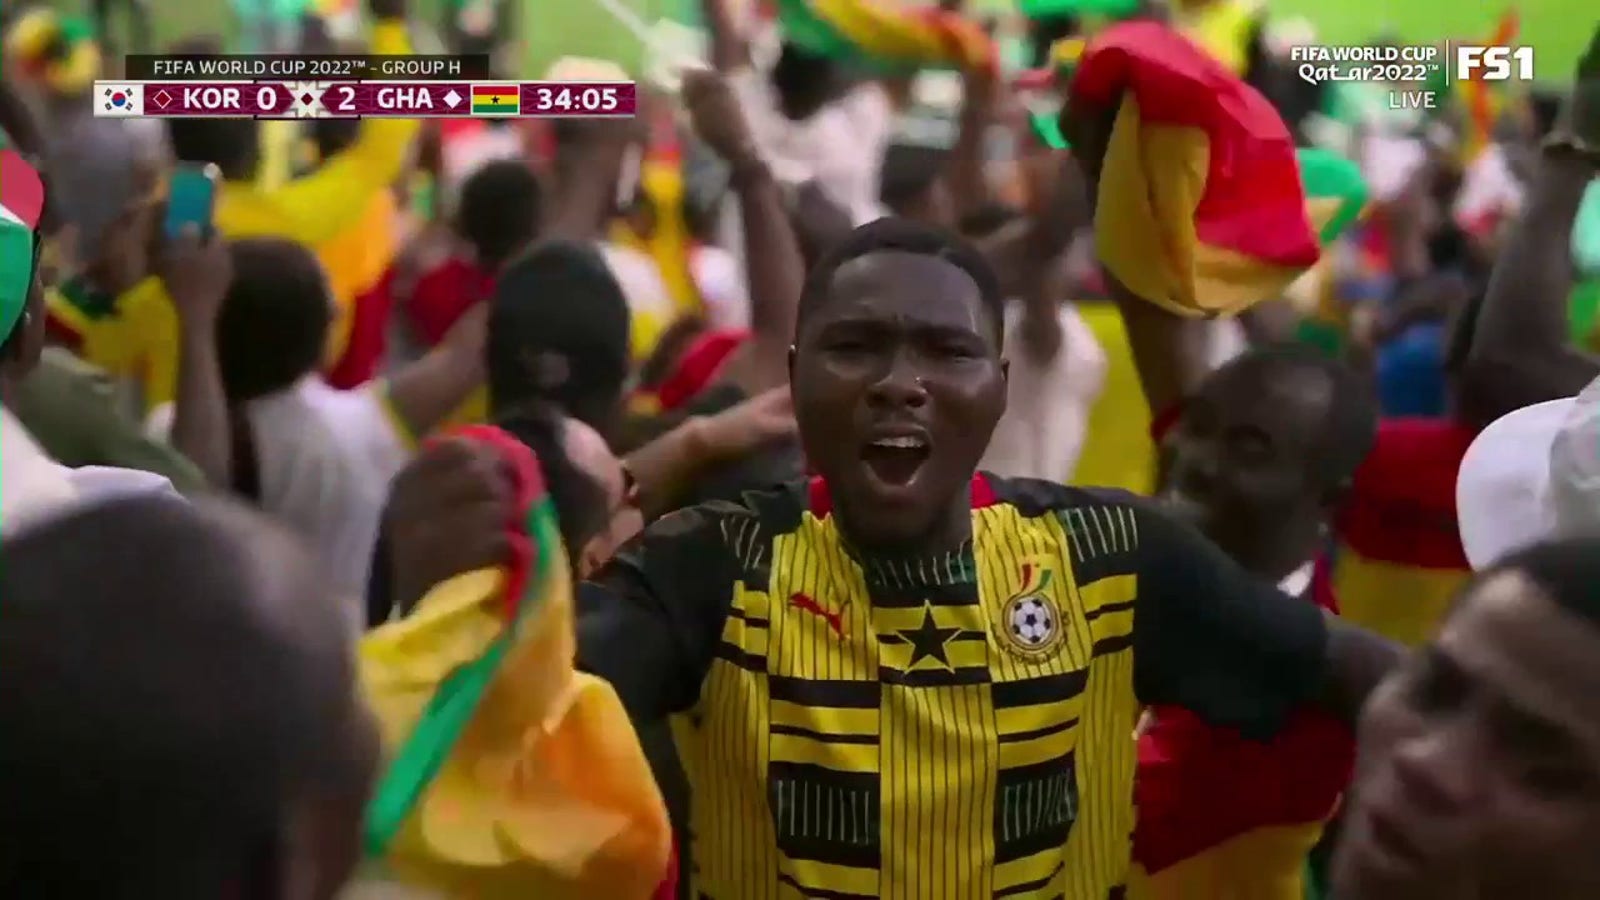 Gol Mohammad Kodos from Ghana against the Republic of Korea in the 34th minute  Football World Cup 2022